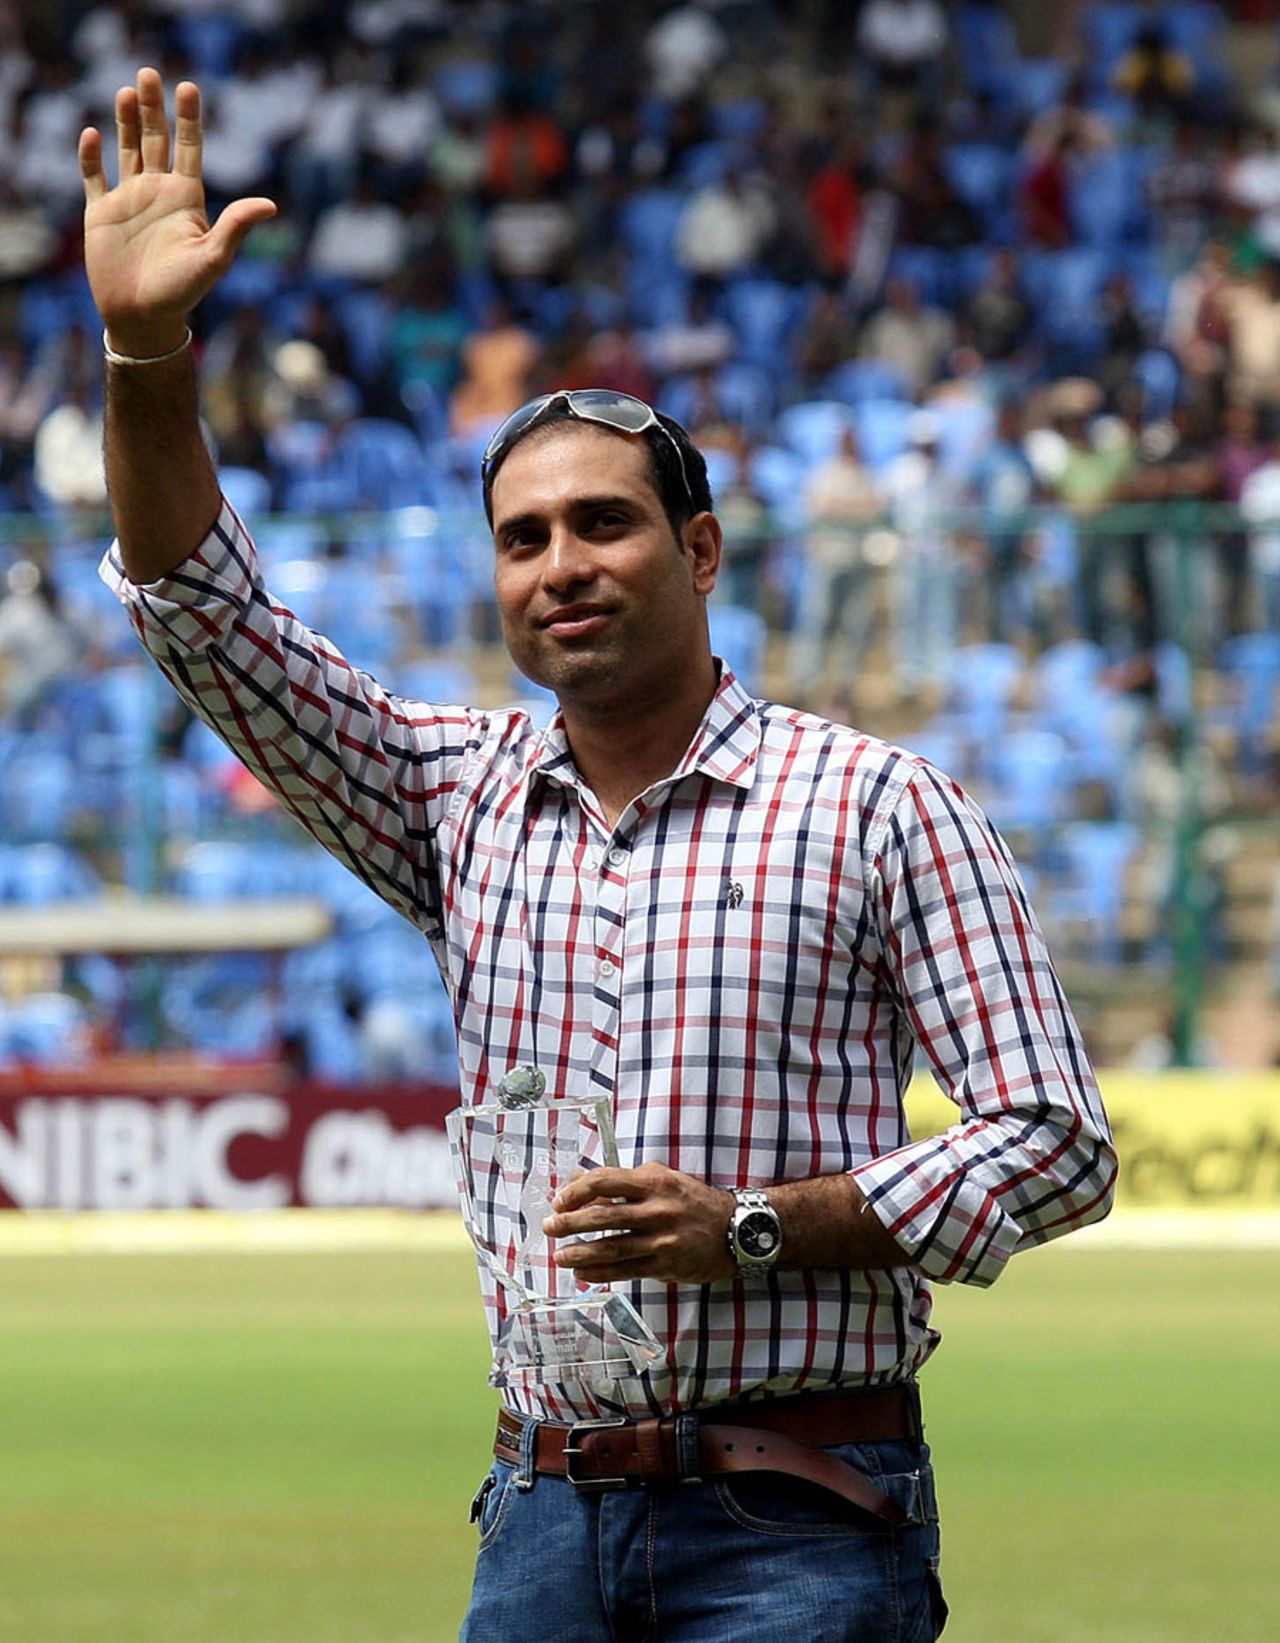 VVS Laxman waves to the Bangalore crowd at a felicitation, India v New Zealand, 2nd Test, Bangalore, 3rd day, September 2, 2012